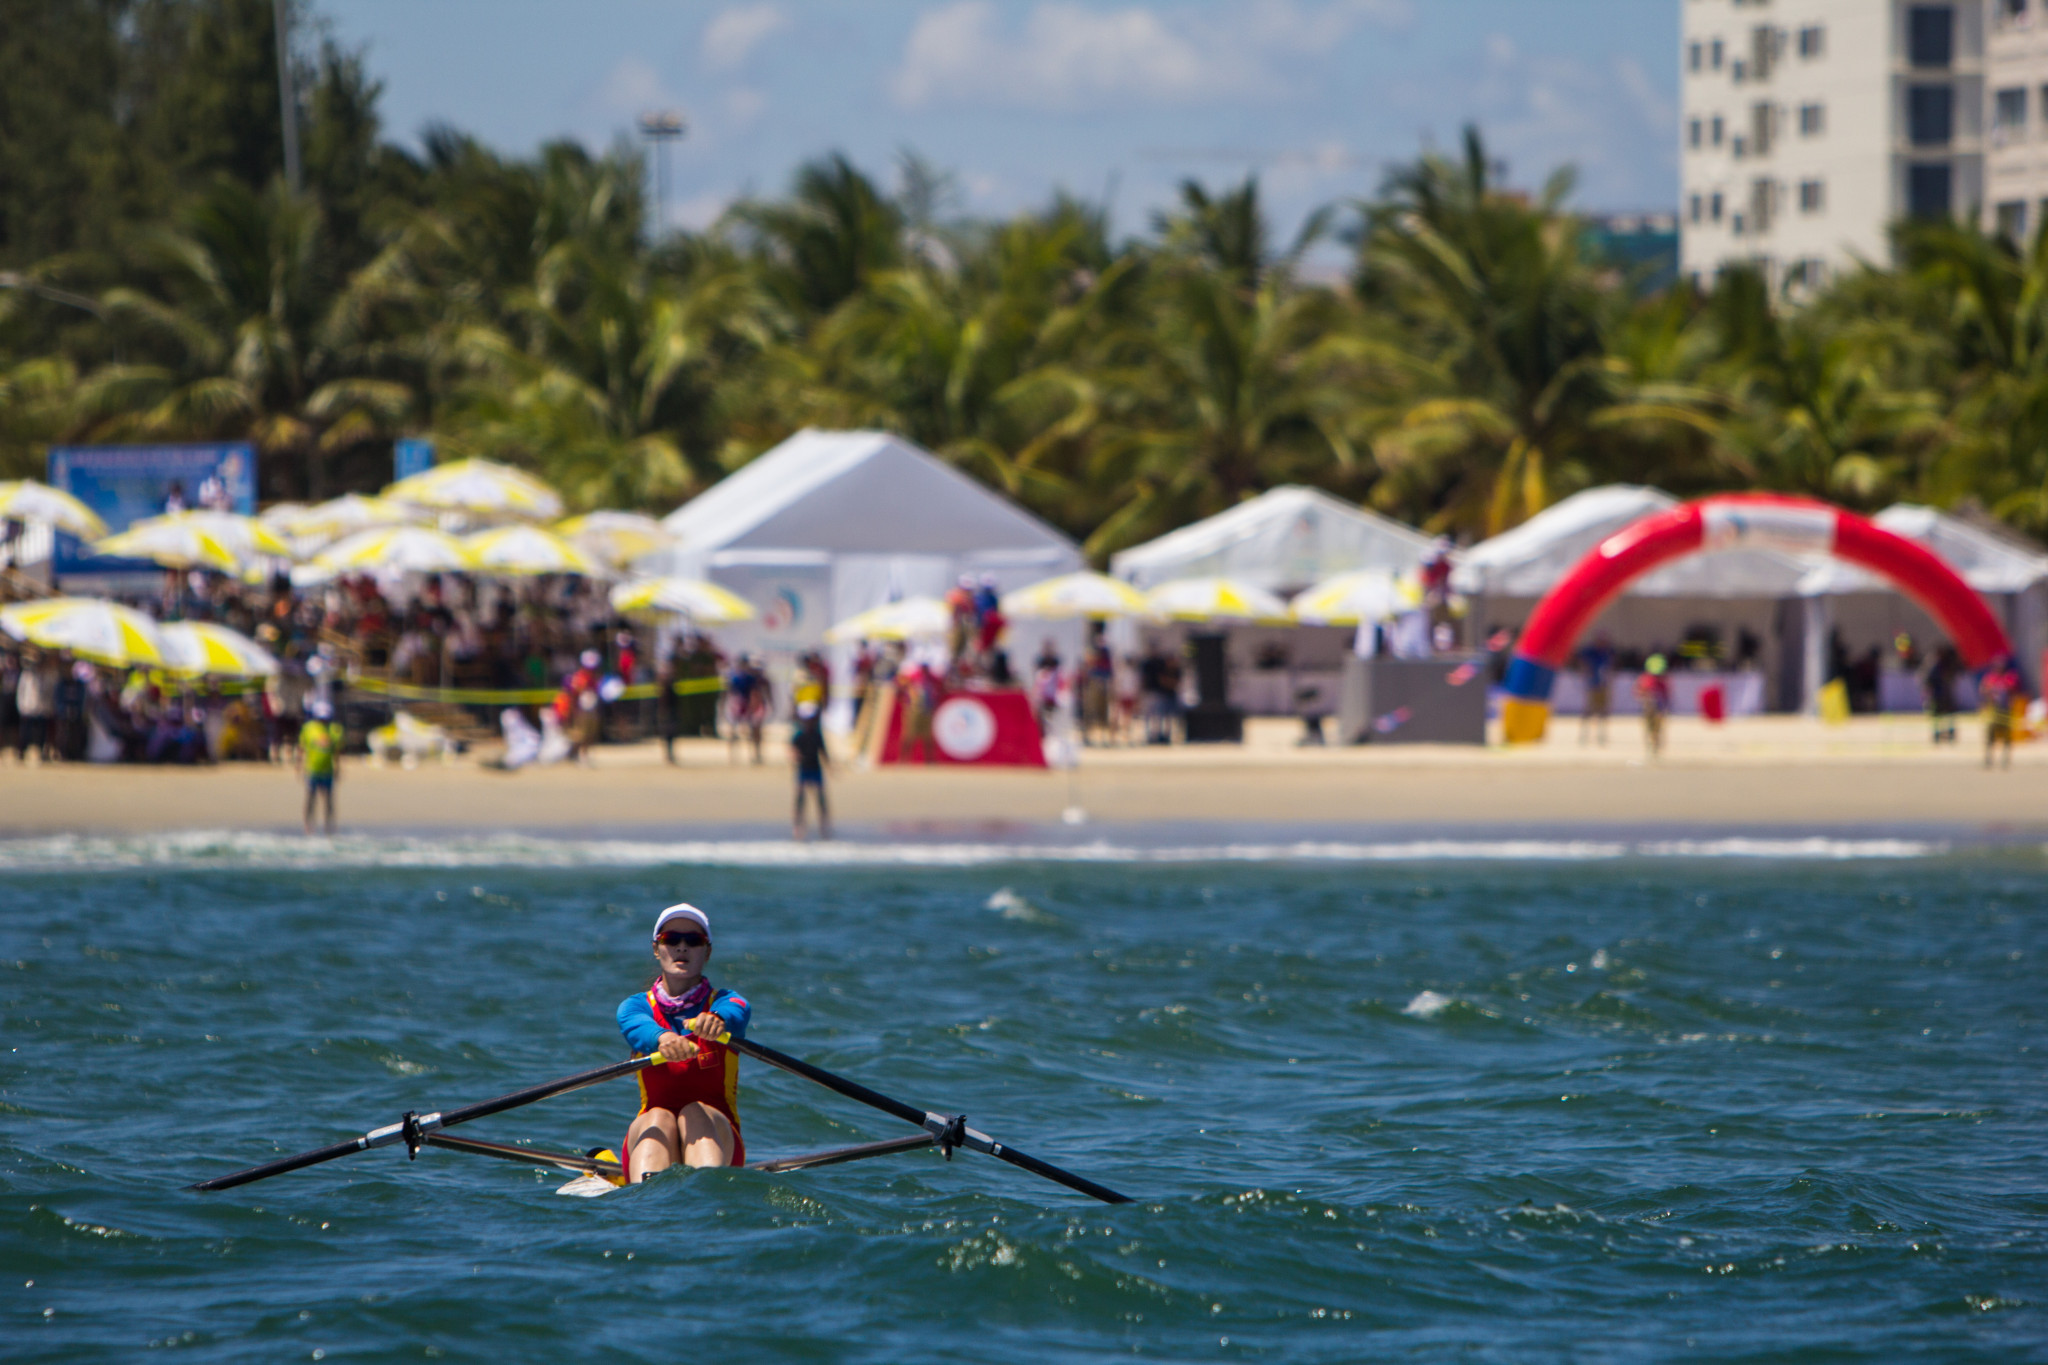 Rowing beach sprints is set to make up part of the 14-strong sporting programme at the Bali 2023 World Beach Games ©ANOC